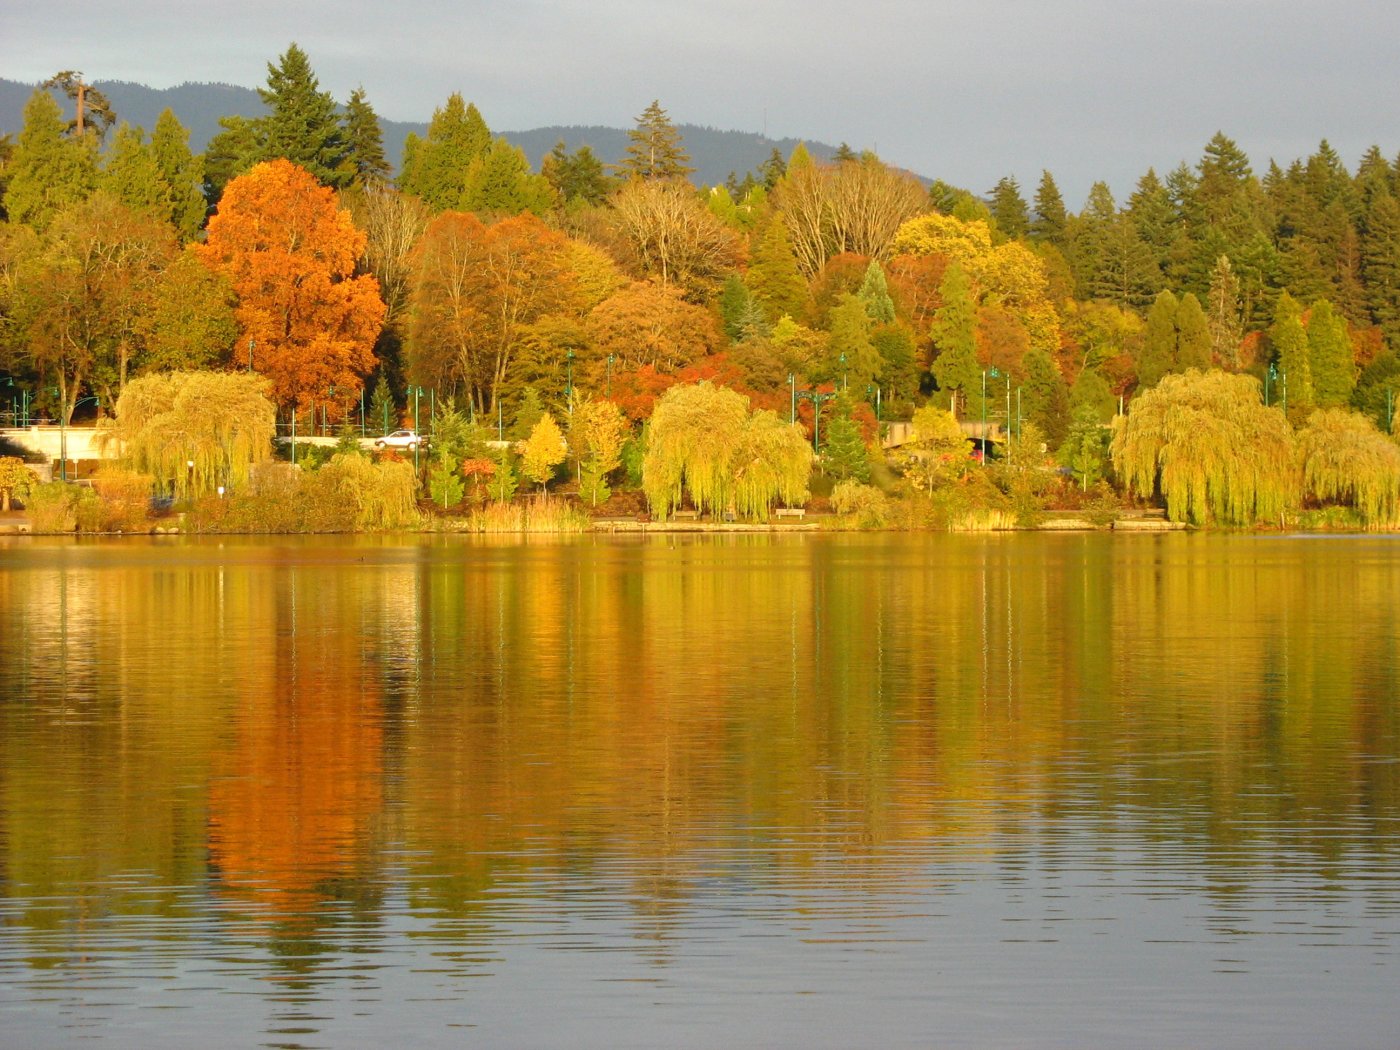 Autumn foliage on the north side of Lost Lagoon (Stanley Park)